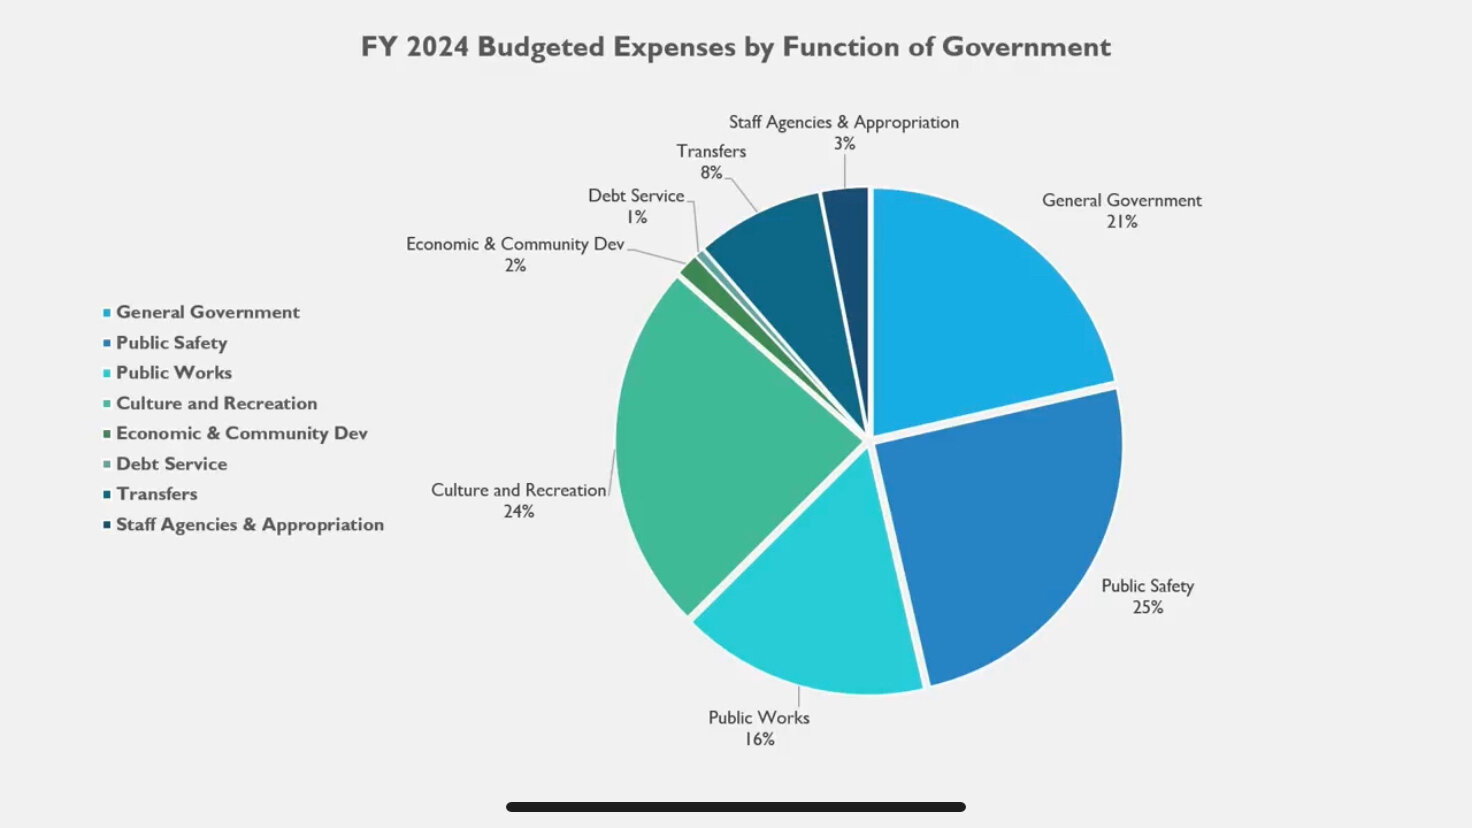 Kim Creech, treasurer for the City of Fairhope presented the 2024 municipal budget to Fairhope City Council. This slide illustrates the budgeted expenses by function.